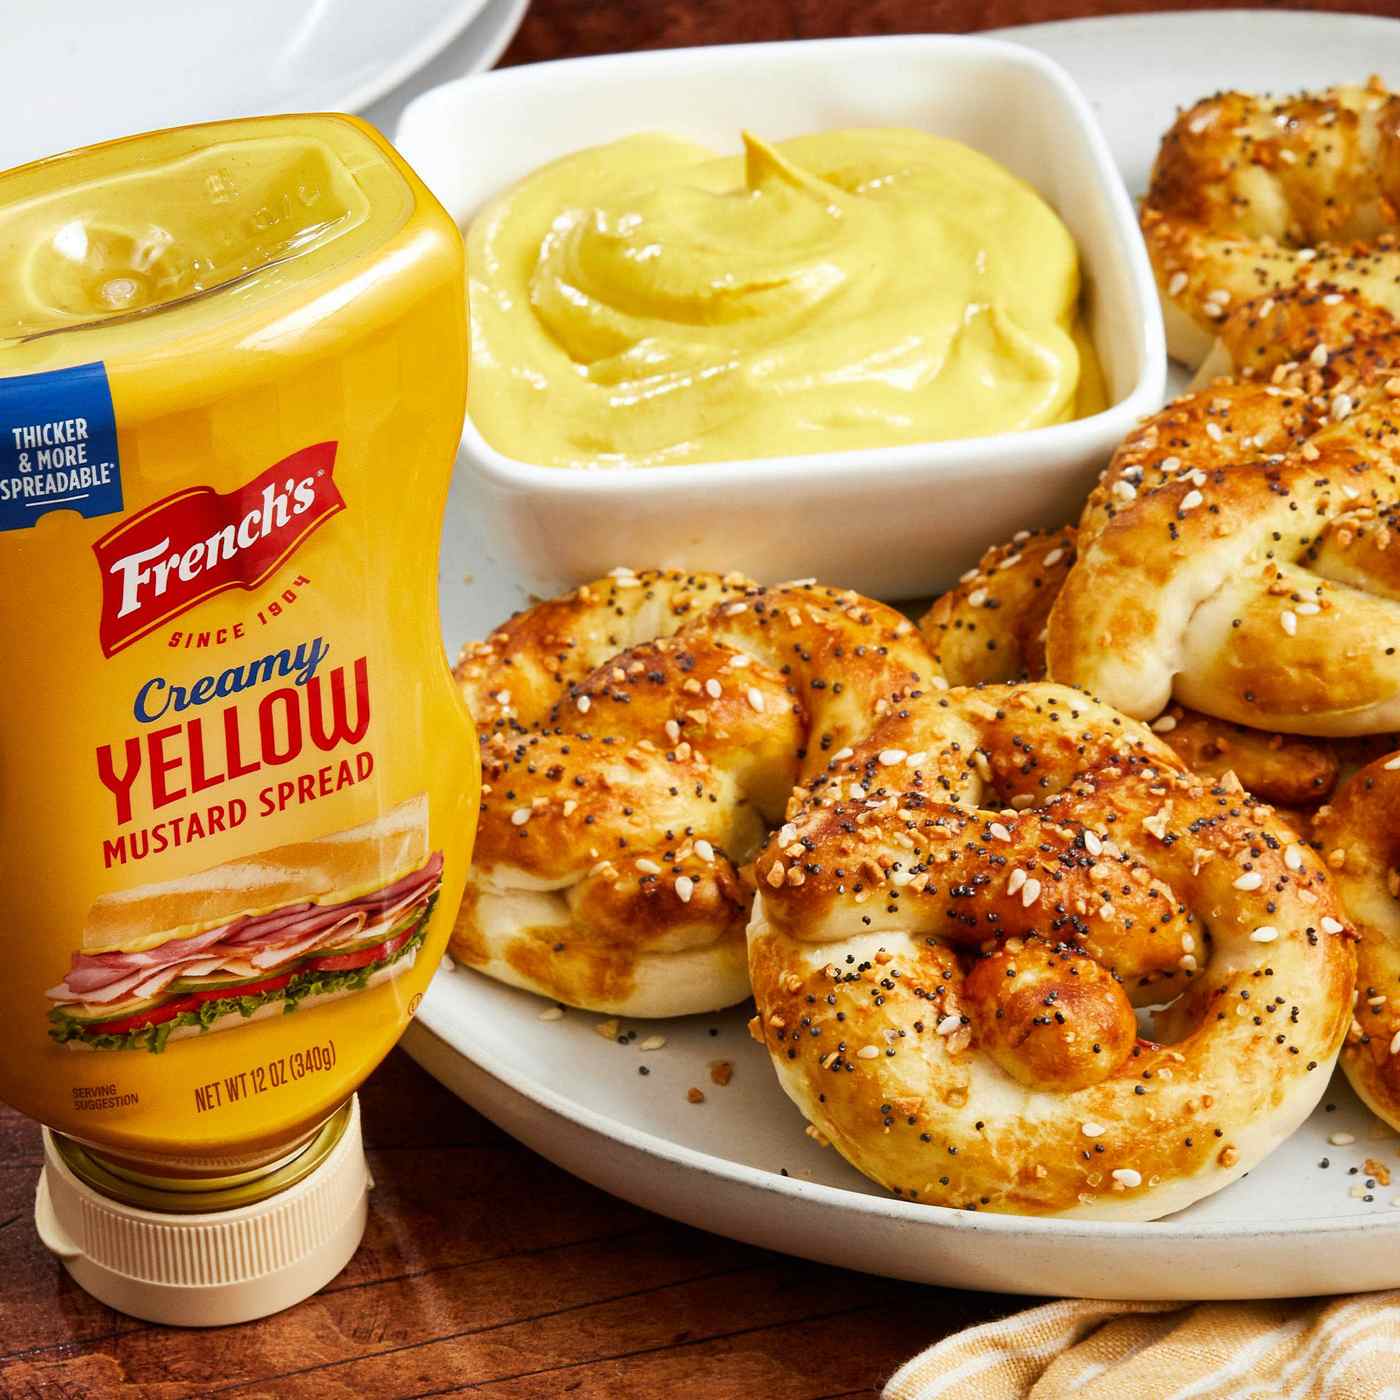 French's Creamy Yellow Mustard Spread; image 7 of 9